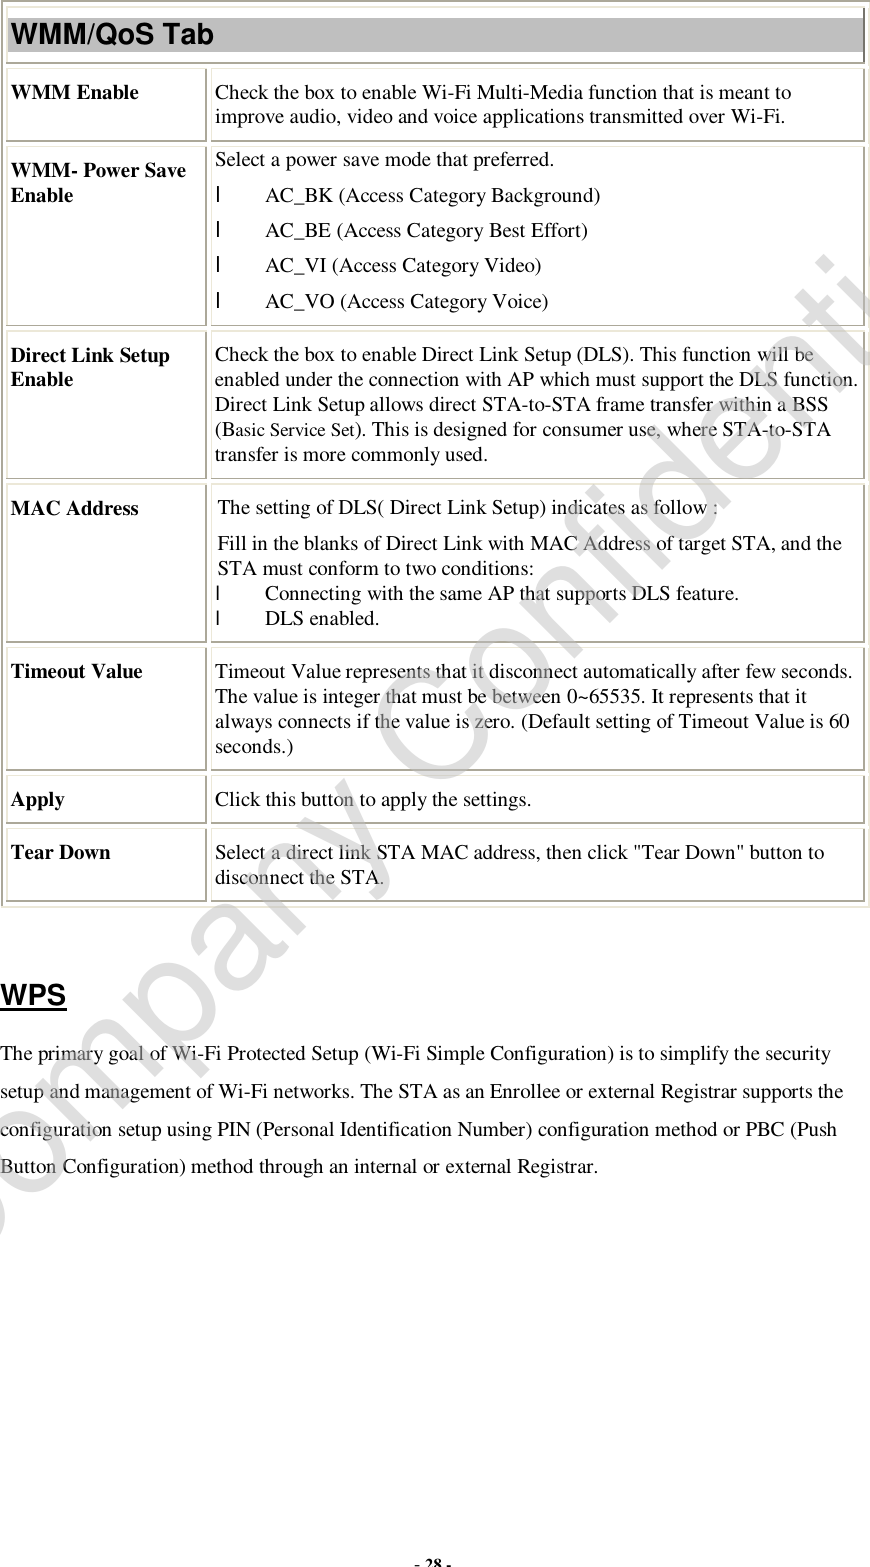  - 28 - WMM/QoS Tab WMM Enable  Check the box to enable Wi-Fi Multi-Media function that is meant to improve audio, video and voice applications transmitted over Wi-Fi. WMM- Power Save Enable Select a power save mode that preferred. l AC_BK (Access Category Background) l AC_BE (Access Category Best Effort) l AC_VI (Access Category Video) l AC_VO (Access Category Voice) Direct Link Setup Enable  Check the box to enable Direct Link Setup (DLS). This function will be enabled under the connection with AP which must support the DLS function. Direct Link Setup allows direct STA-to-STA frame transfer within a BSS (Basic Service Set). This is designed for consumer use, where STA-to-STA transfer is more commonly used. MAC Address  The setting of DLS( Direct Link Setup) indicates as follow : Fill in the blanks of Direct Link with MAC Address of target STA, and the STA must conform to two conditions: l Connecting with the same AP that supports DLS feature. l DLS enabled. Timeout Value  Timeout Value represents that it disconnect automatically after few seconds. The value is integer that must be between 0~65535. It represents that it always connects if the value is zero. (Default setting of Timeout Value is 60 seconds.) Apply  Click this button to apply the settings. Tear Down  Select a direct link STA MAC address, then click &quot;Tear Down&quot; button to disconnect the STA.  WPS The primary goal of Wi-Fi Protected Setup (Wi-Fi Simple Configuration) is to simplify the security setup and management of Wi-Fi networks. The STA as an Enrollee or external Registrar supports the configuration setup using PIN (Personal Identification Number) configuration method or PBC (Push Button Configuration) method through an internal or external Registrar. Company Confidential